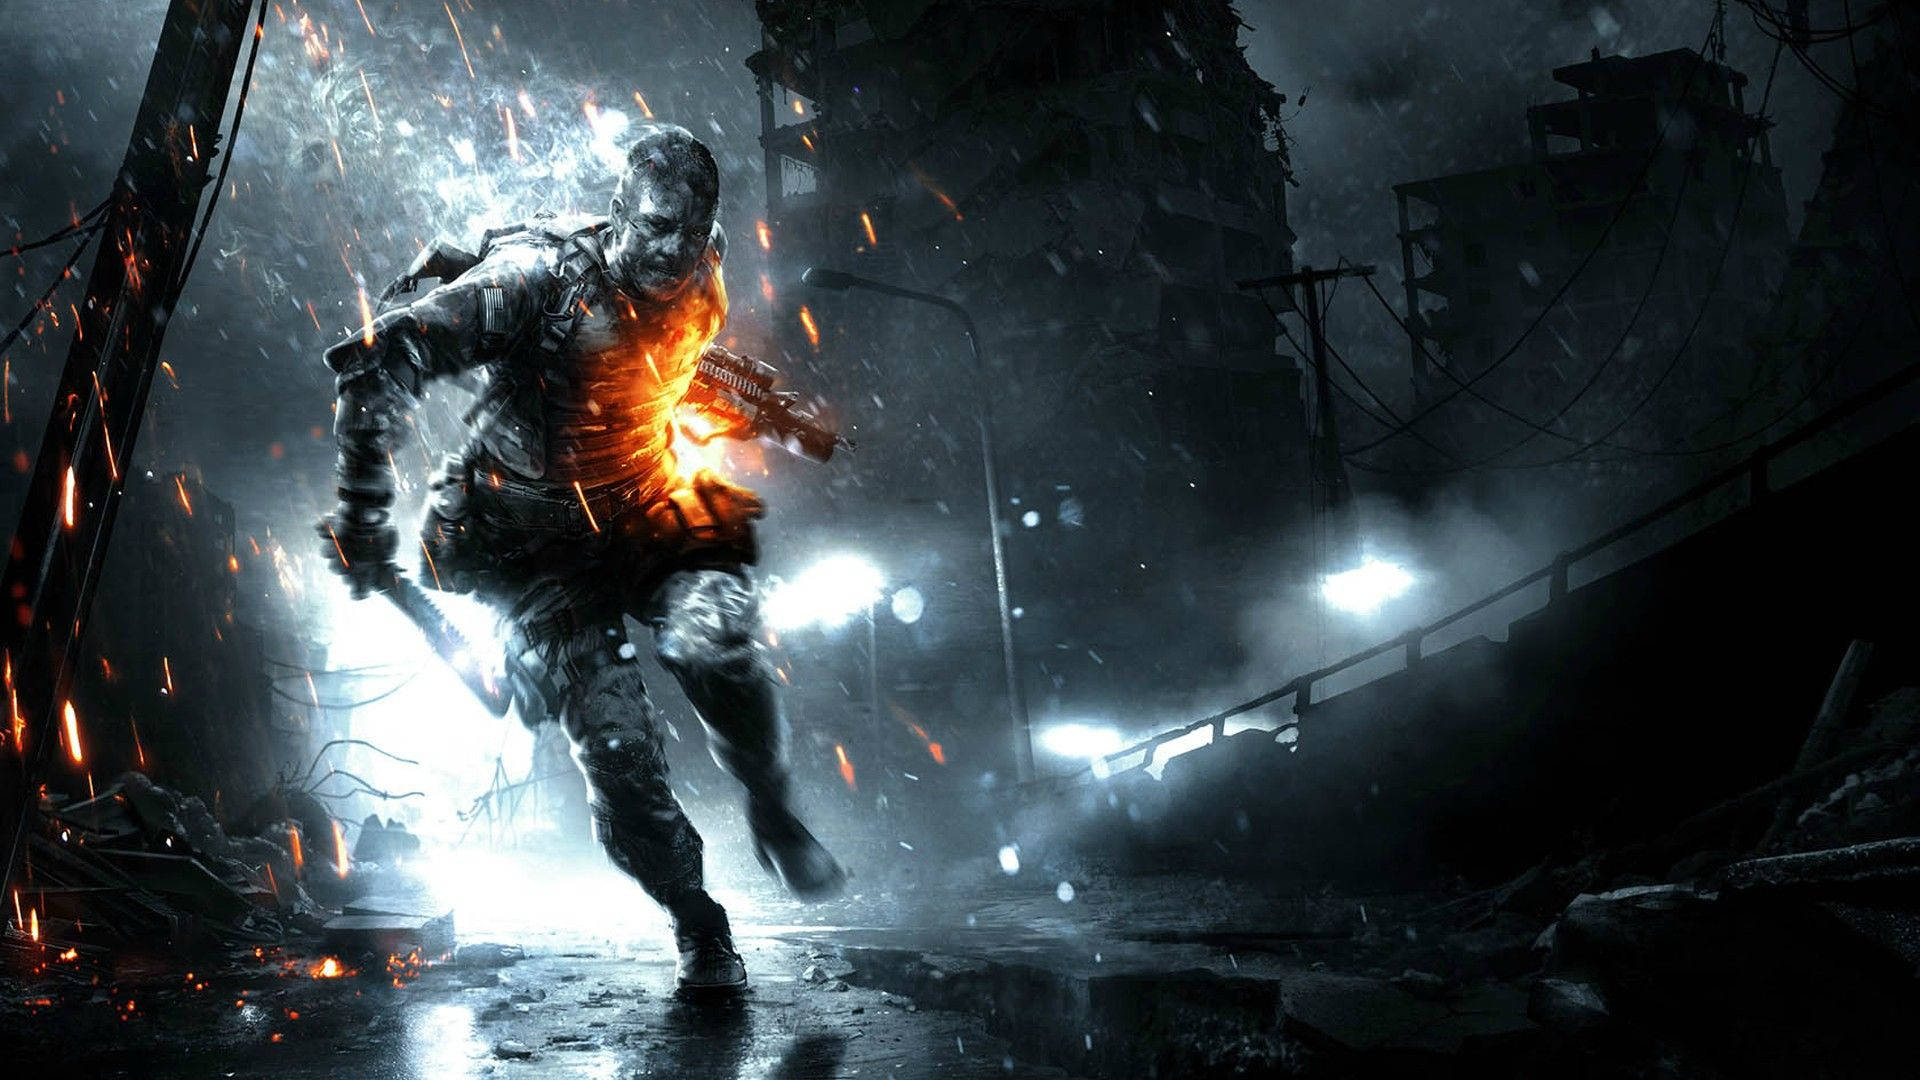 Hd Cool Battlefield Gaming Cover